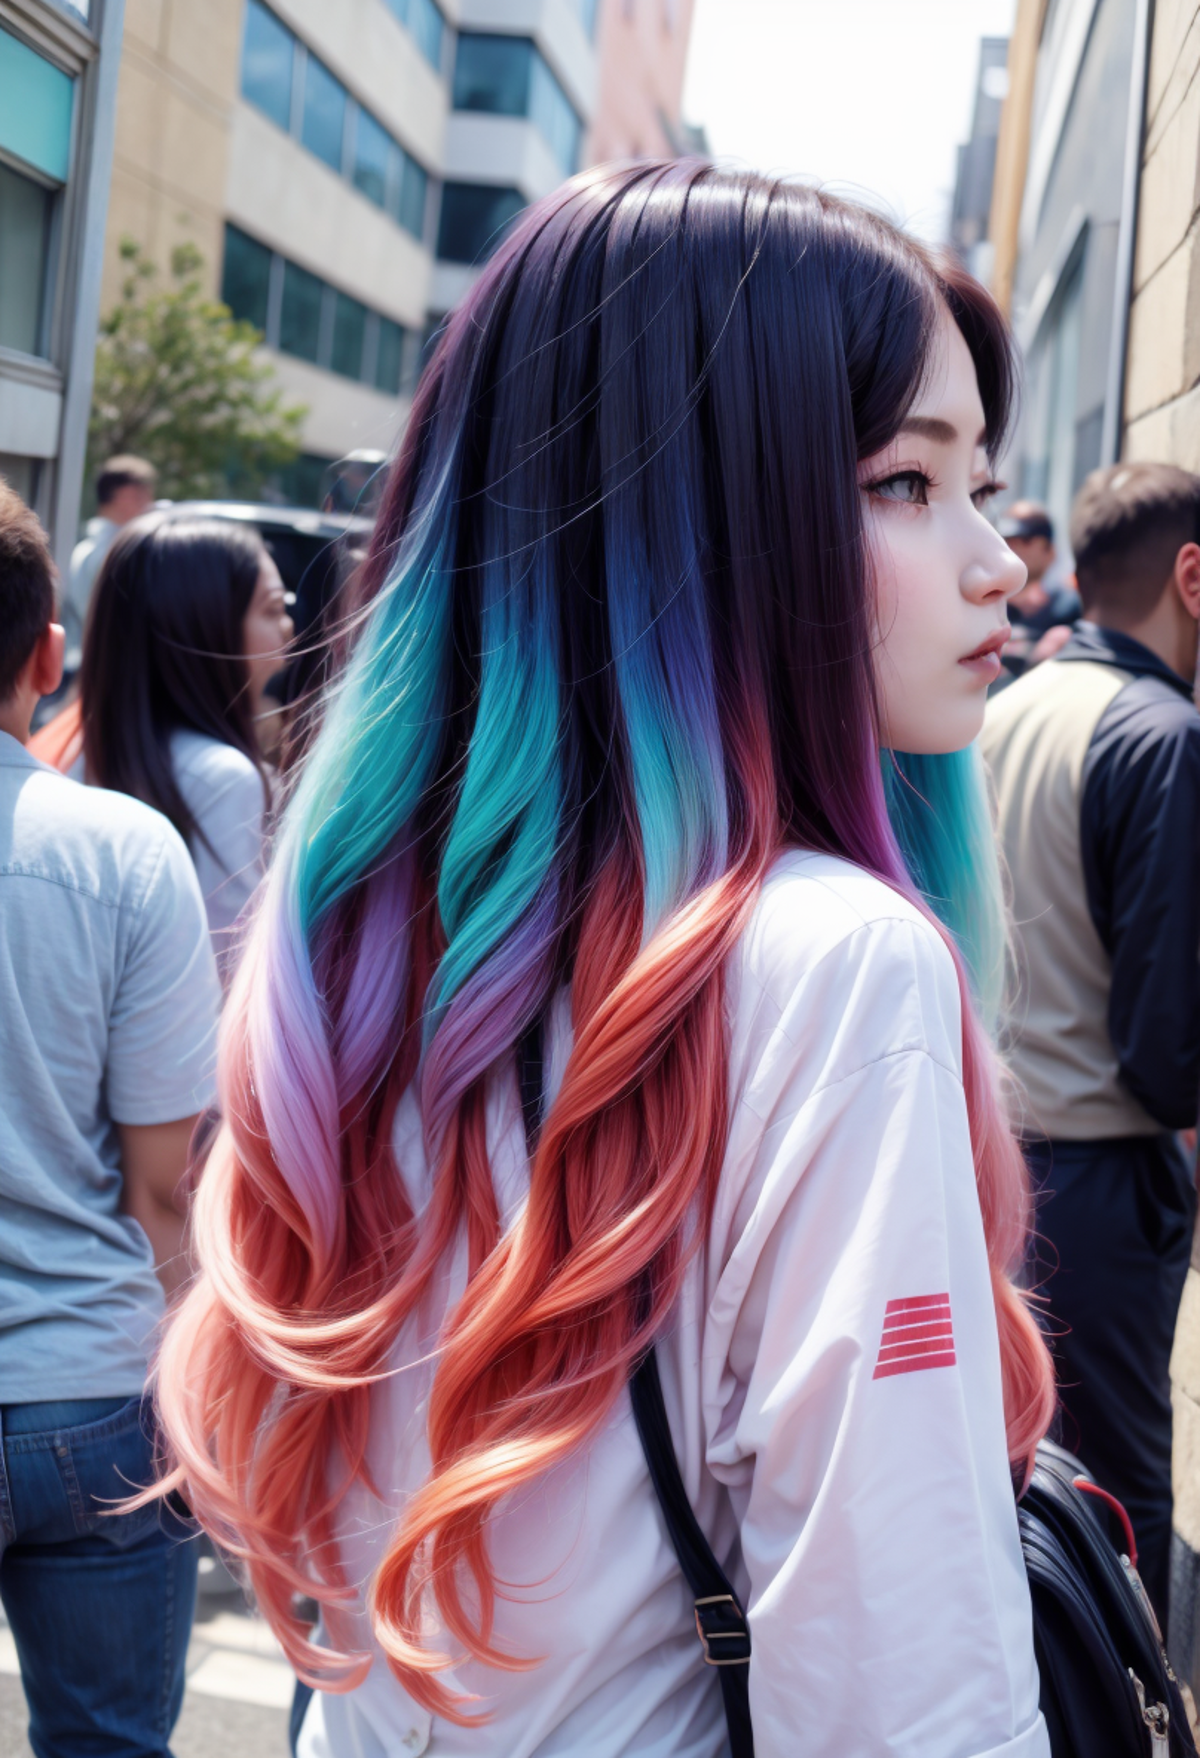 Gradient Girl image by World_Ai